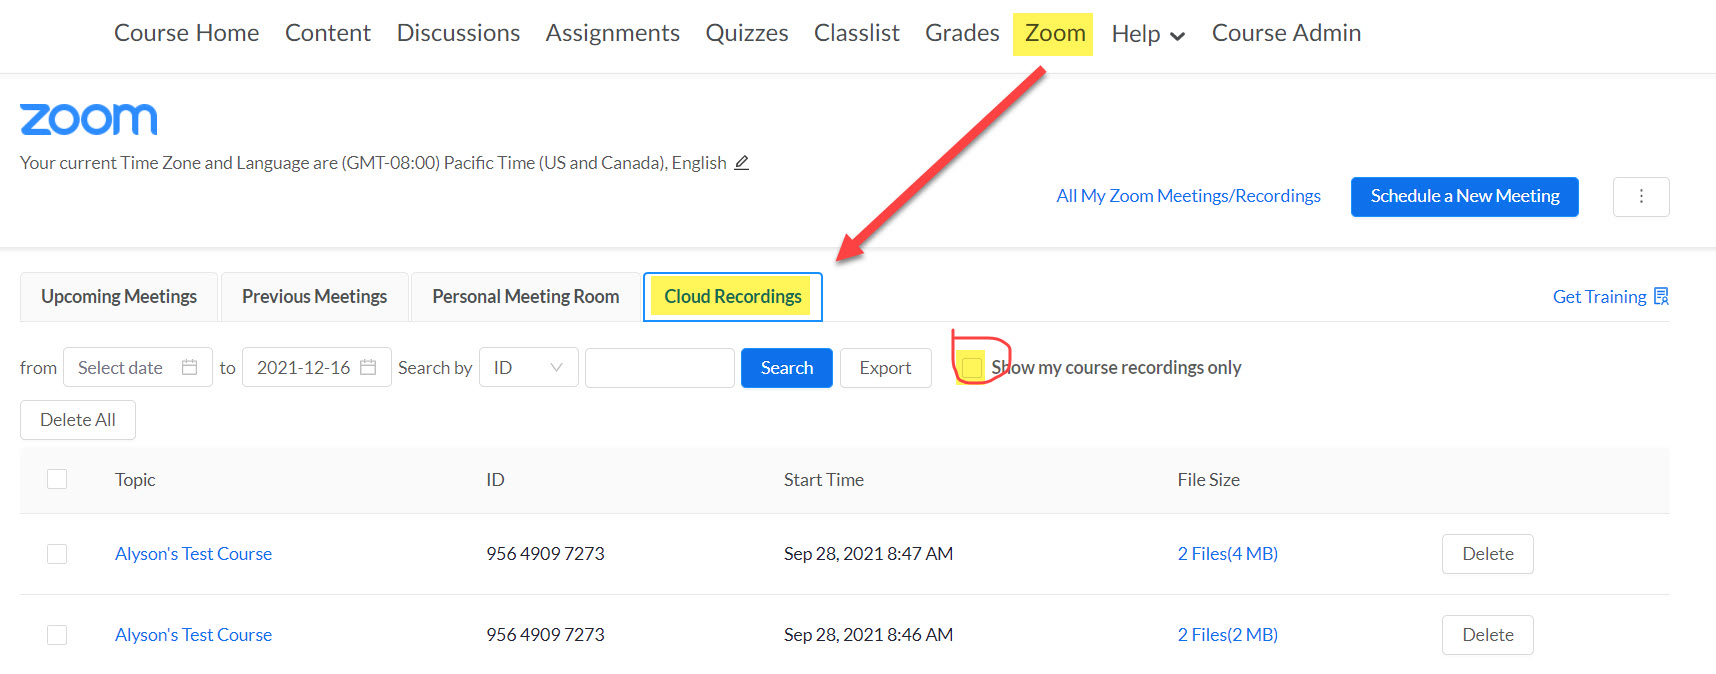 Zoom Cloud Recordings tab with the Show my course recordings only checkbox highlighted